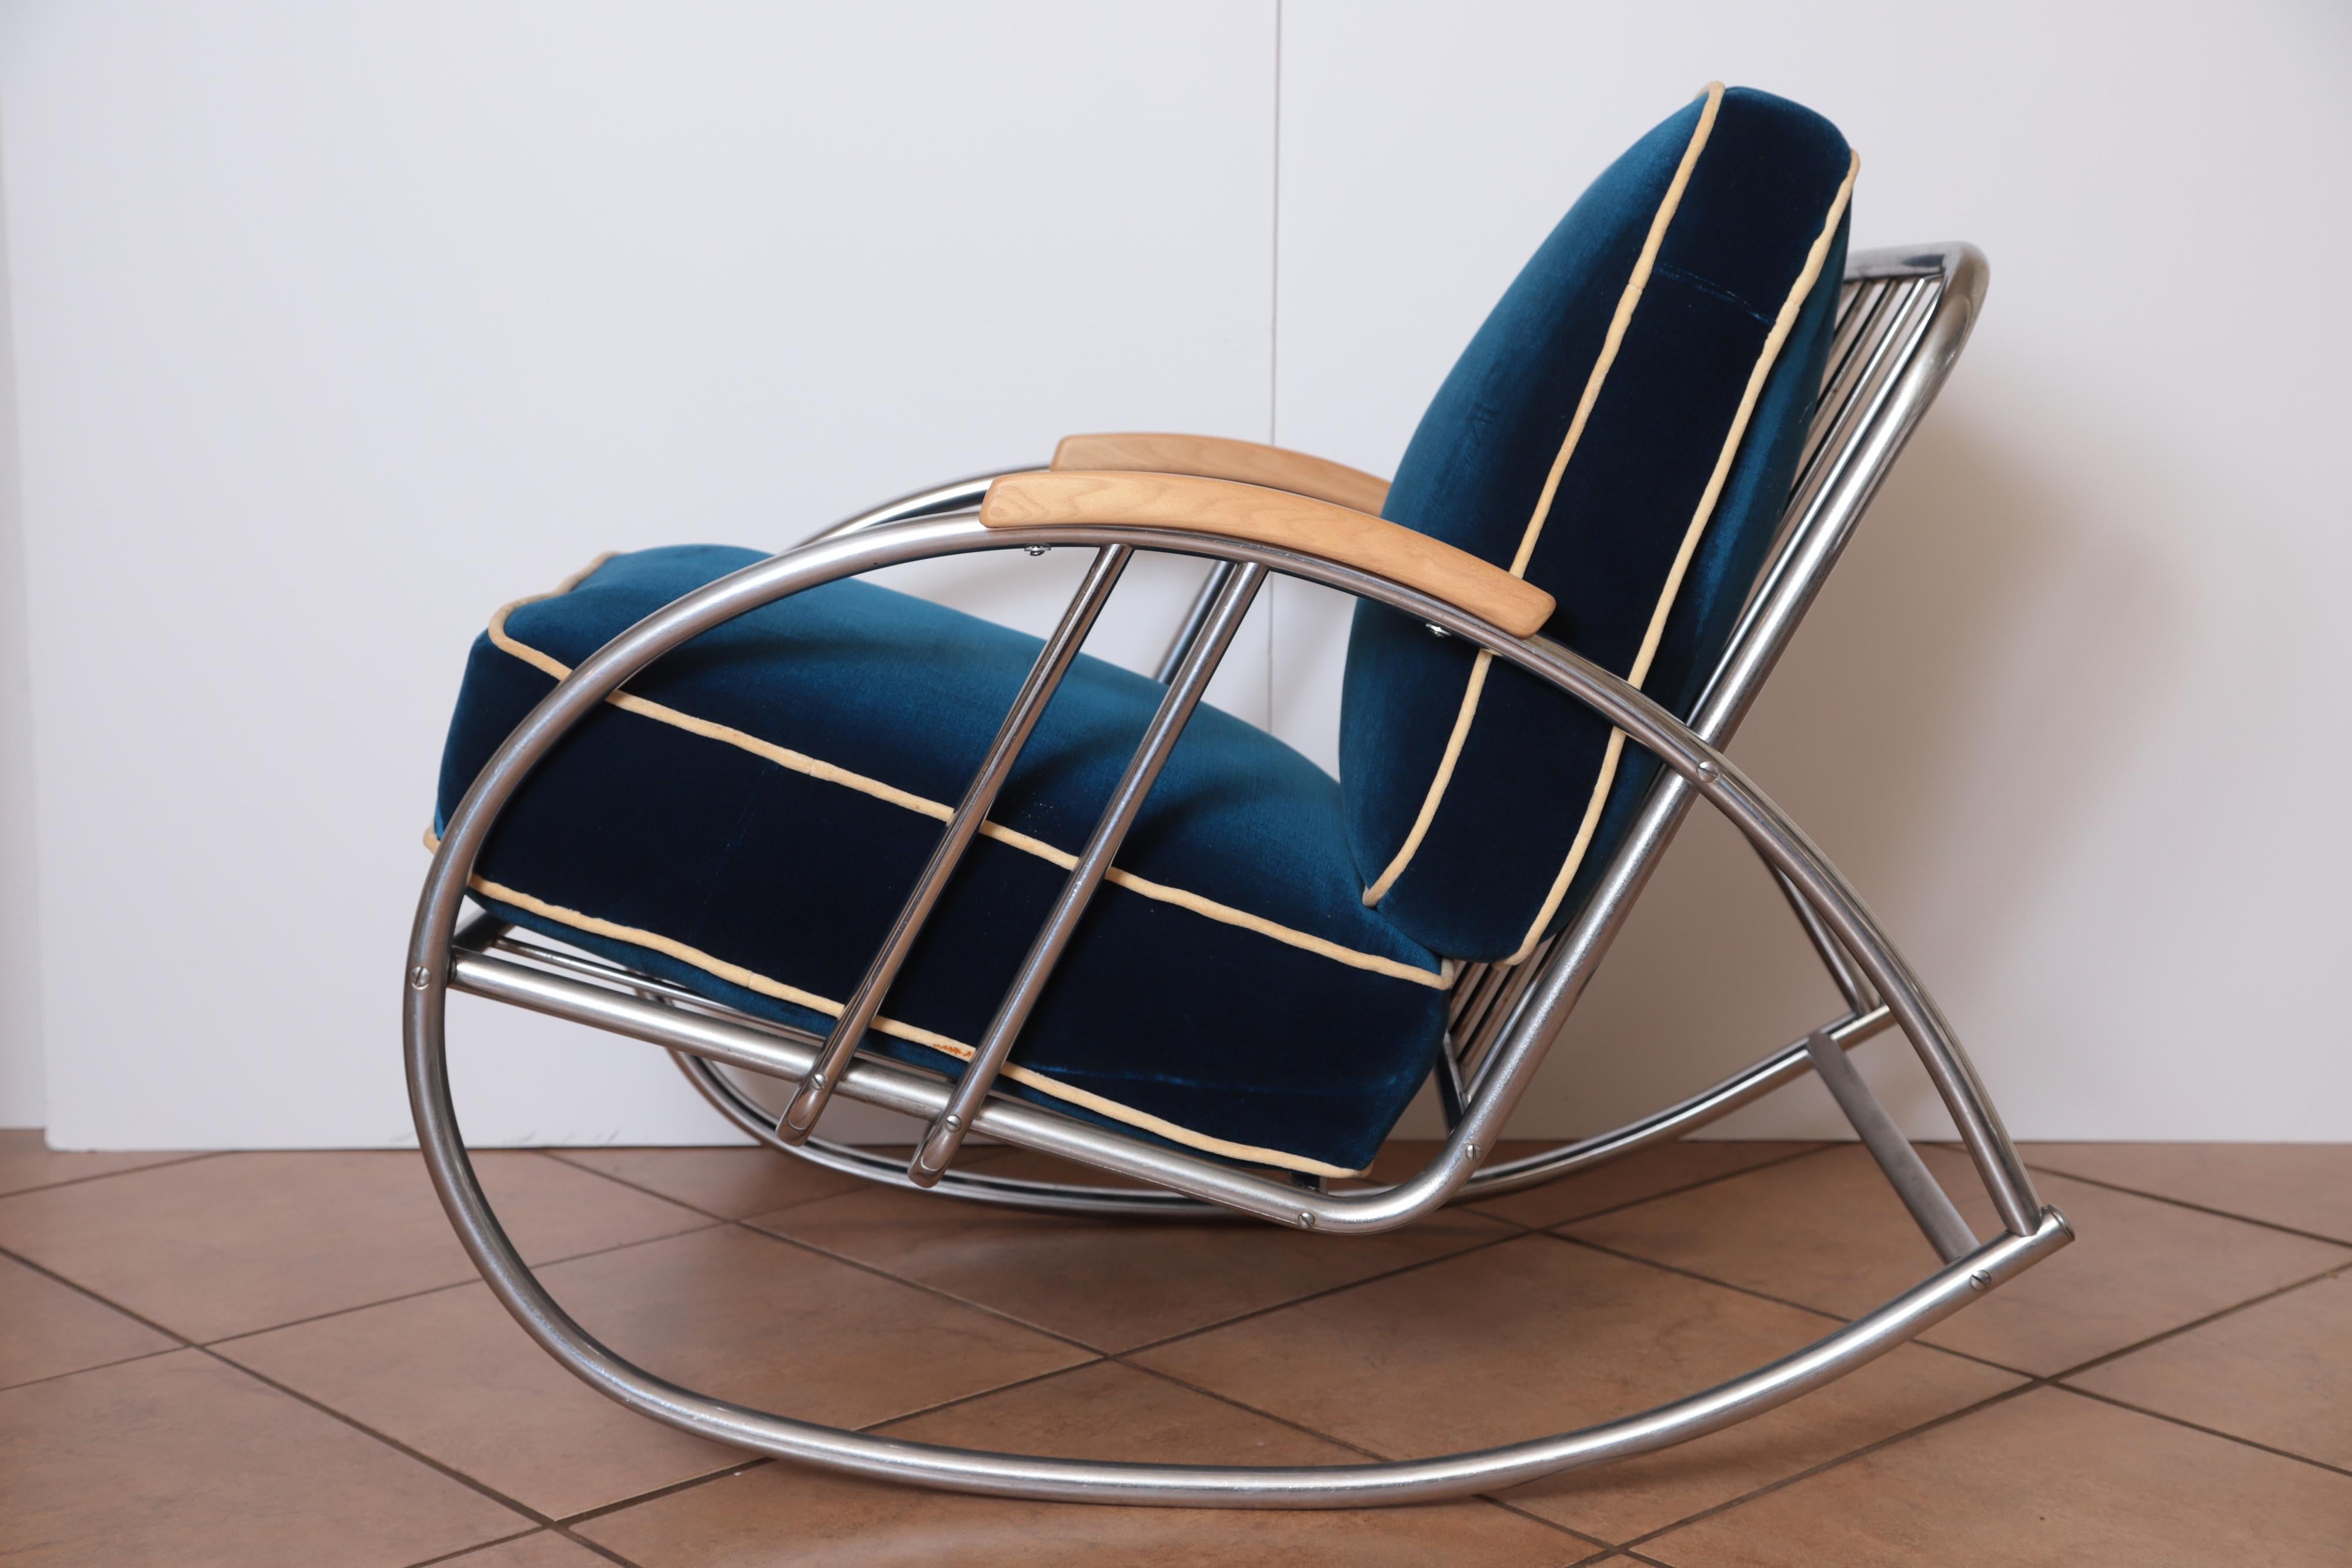 Art Deco Machine Age Wolfgang Hoffmann for Howell Iconic Indoor Rocking Chair Hofmann Hoffman   PRICE REDUCED from $14,500

Rare ICONIC Howell Modern Chromsteel Furniture #377 Rocker, circa 1936 catalog.  Chrome steel
Un-restored example, with good